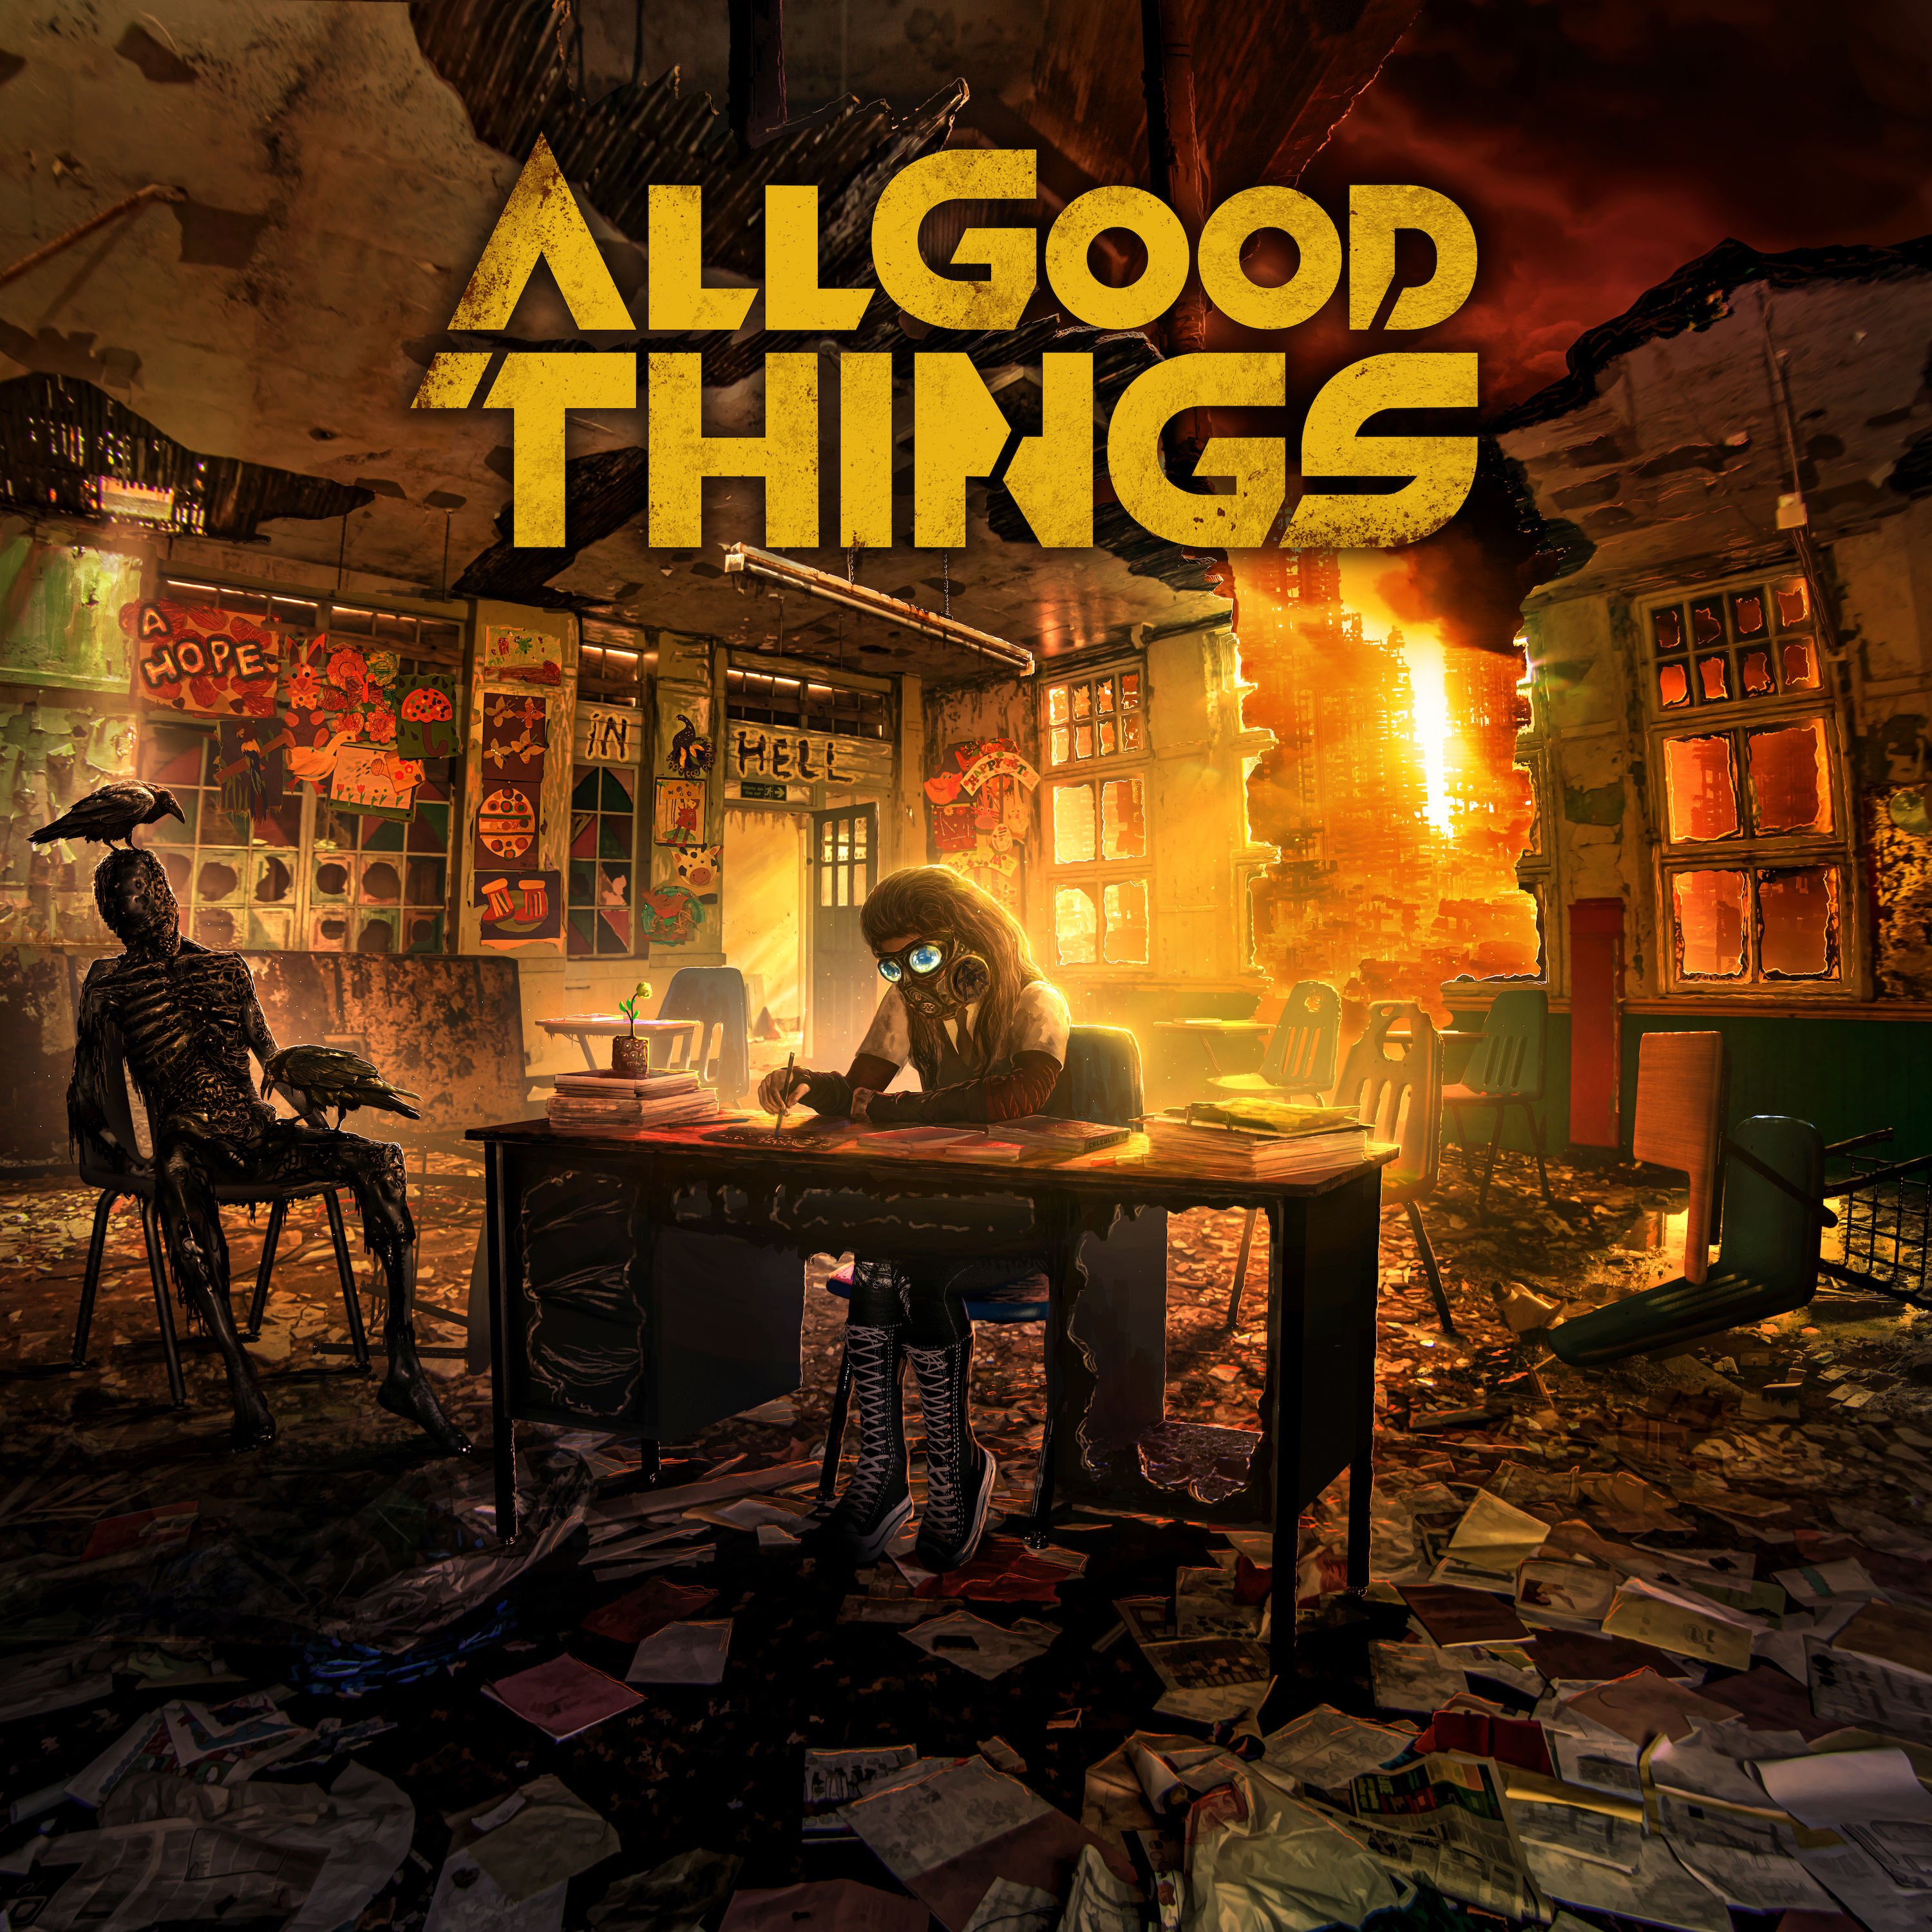 All Good Things – A Hope In Hell (2021) [FLAC 24bit/192kHz]